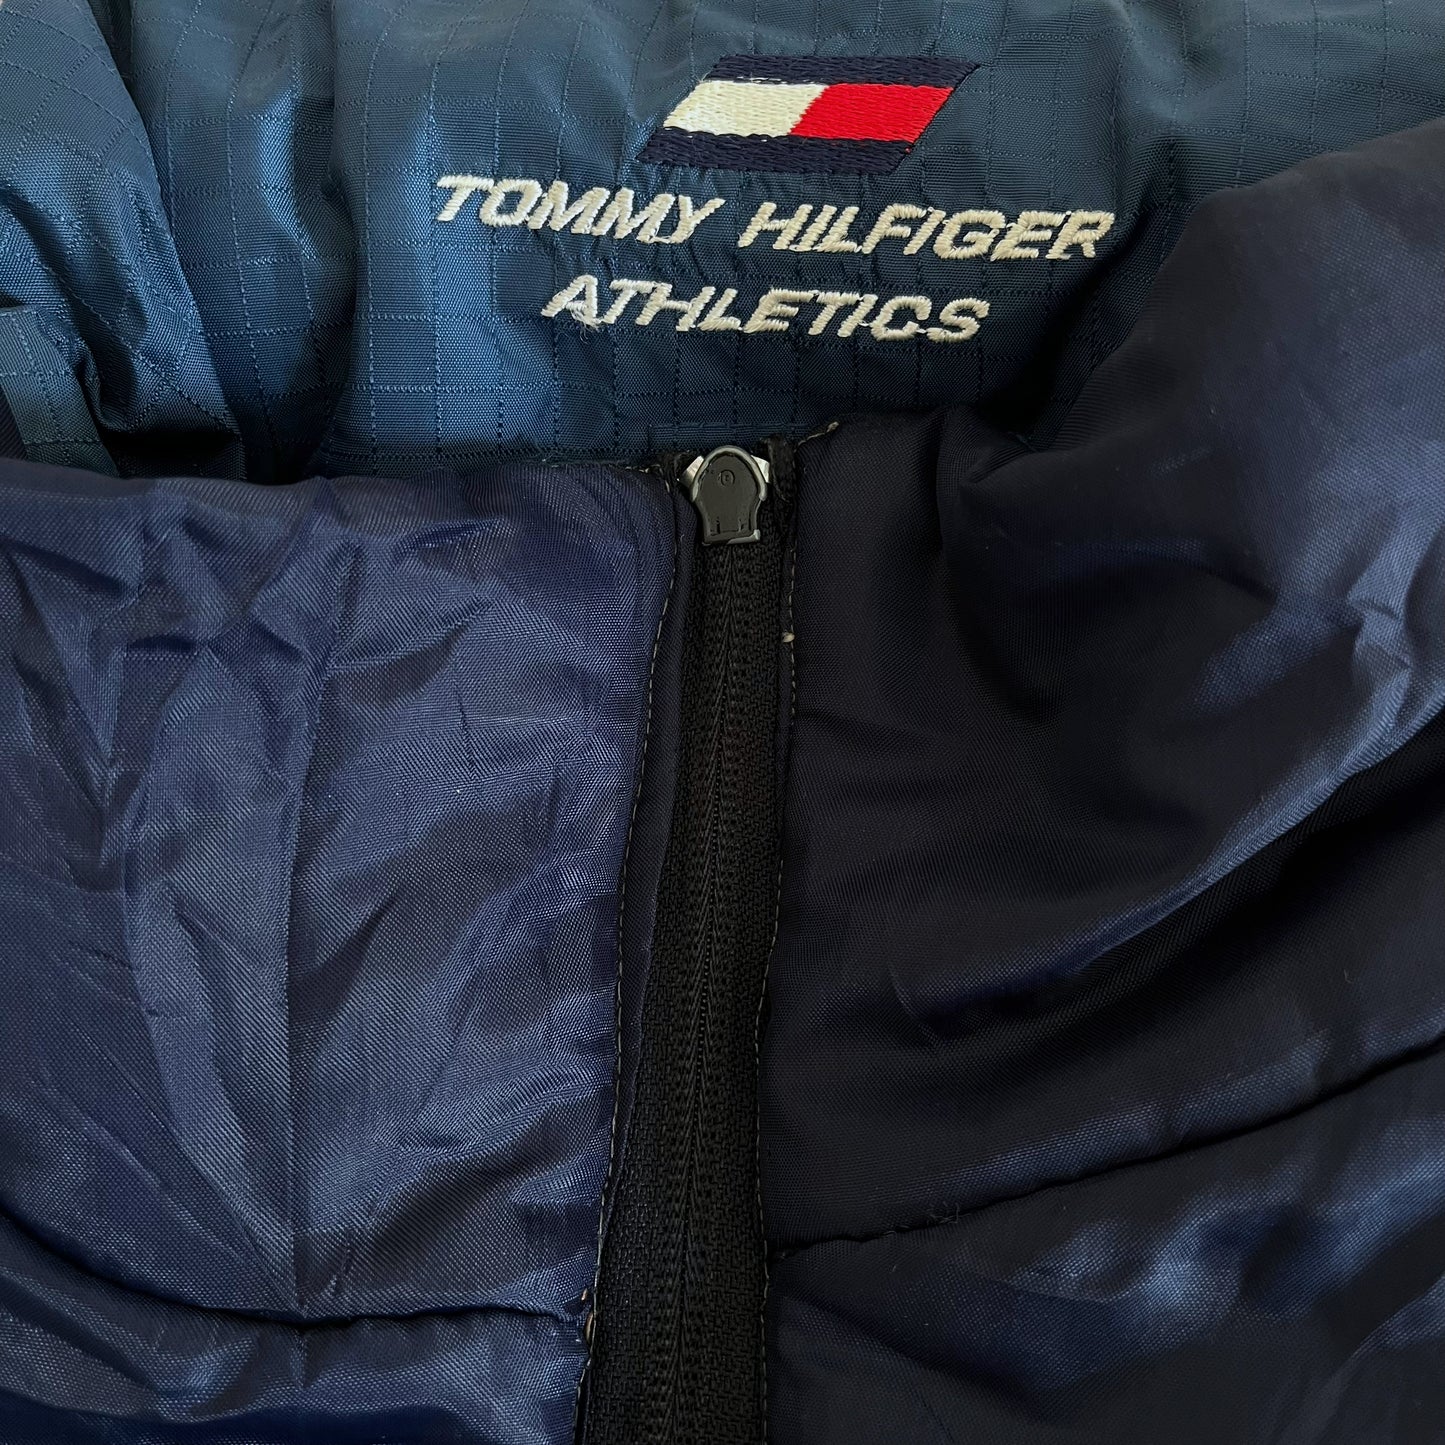 Vintage 90s Tommy Hilfiger Athletics Reversible Spell Out Puffer Jacket Zip - Casspios Dream